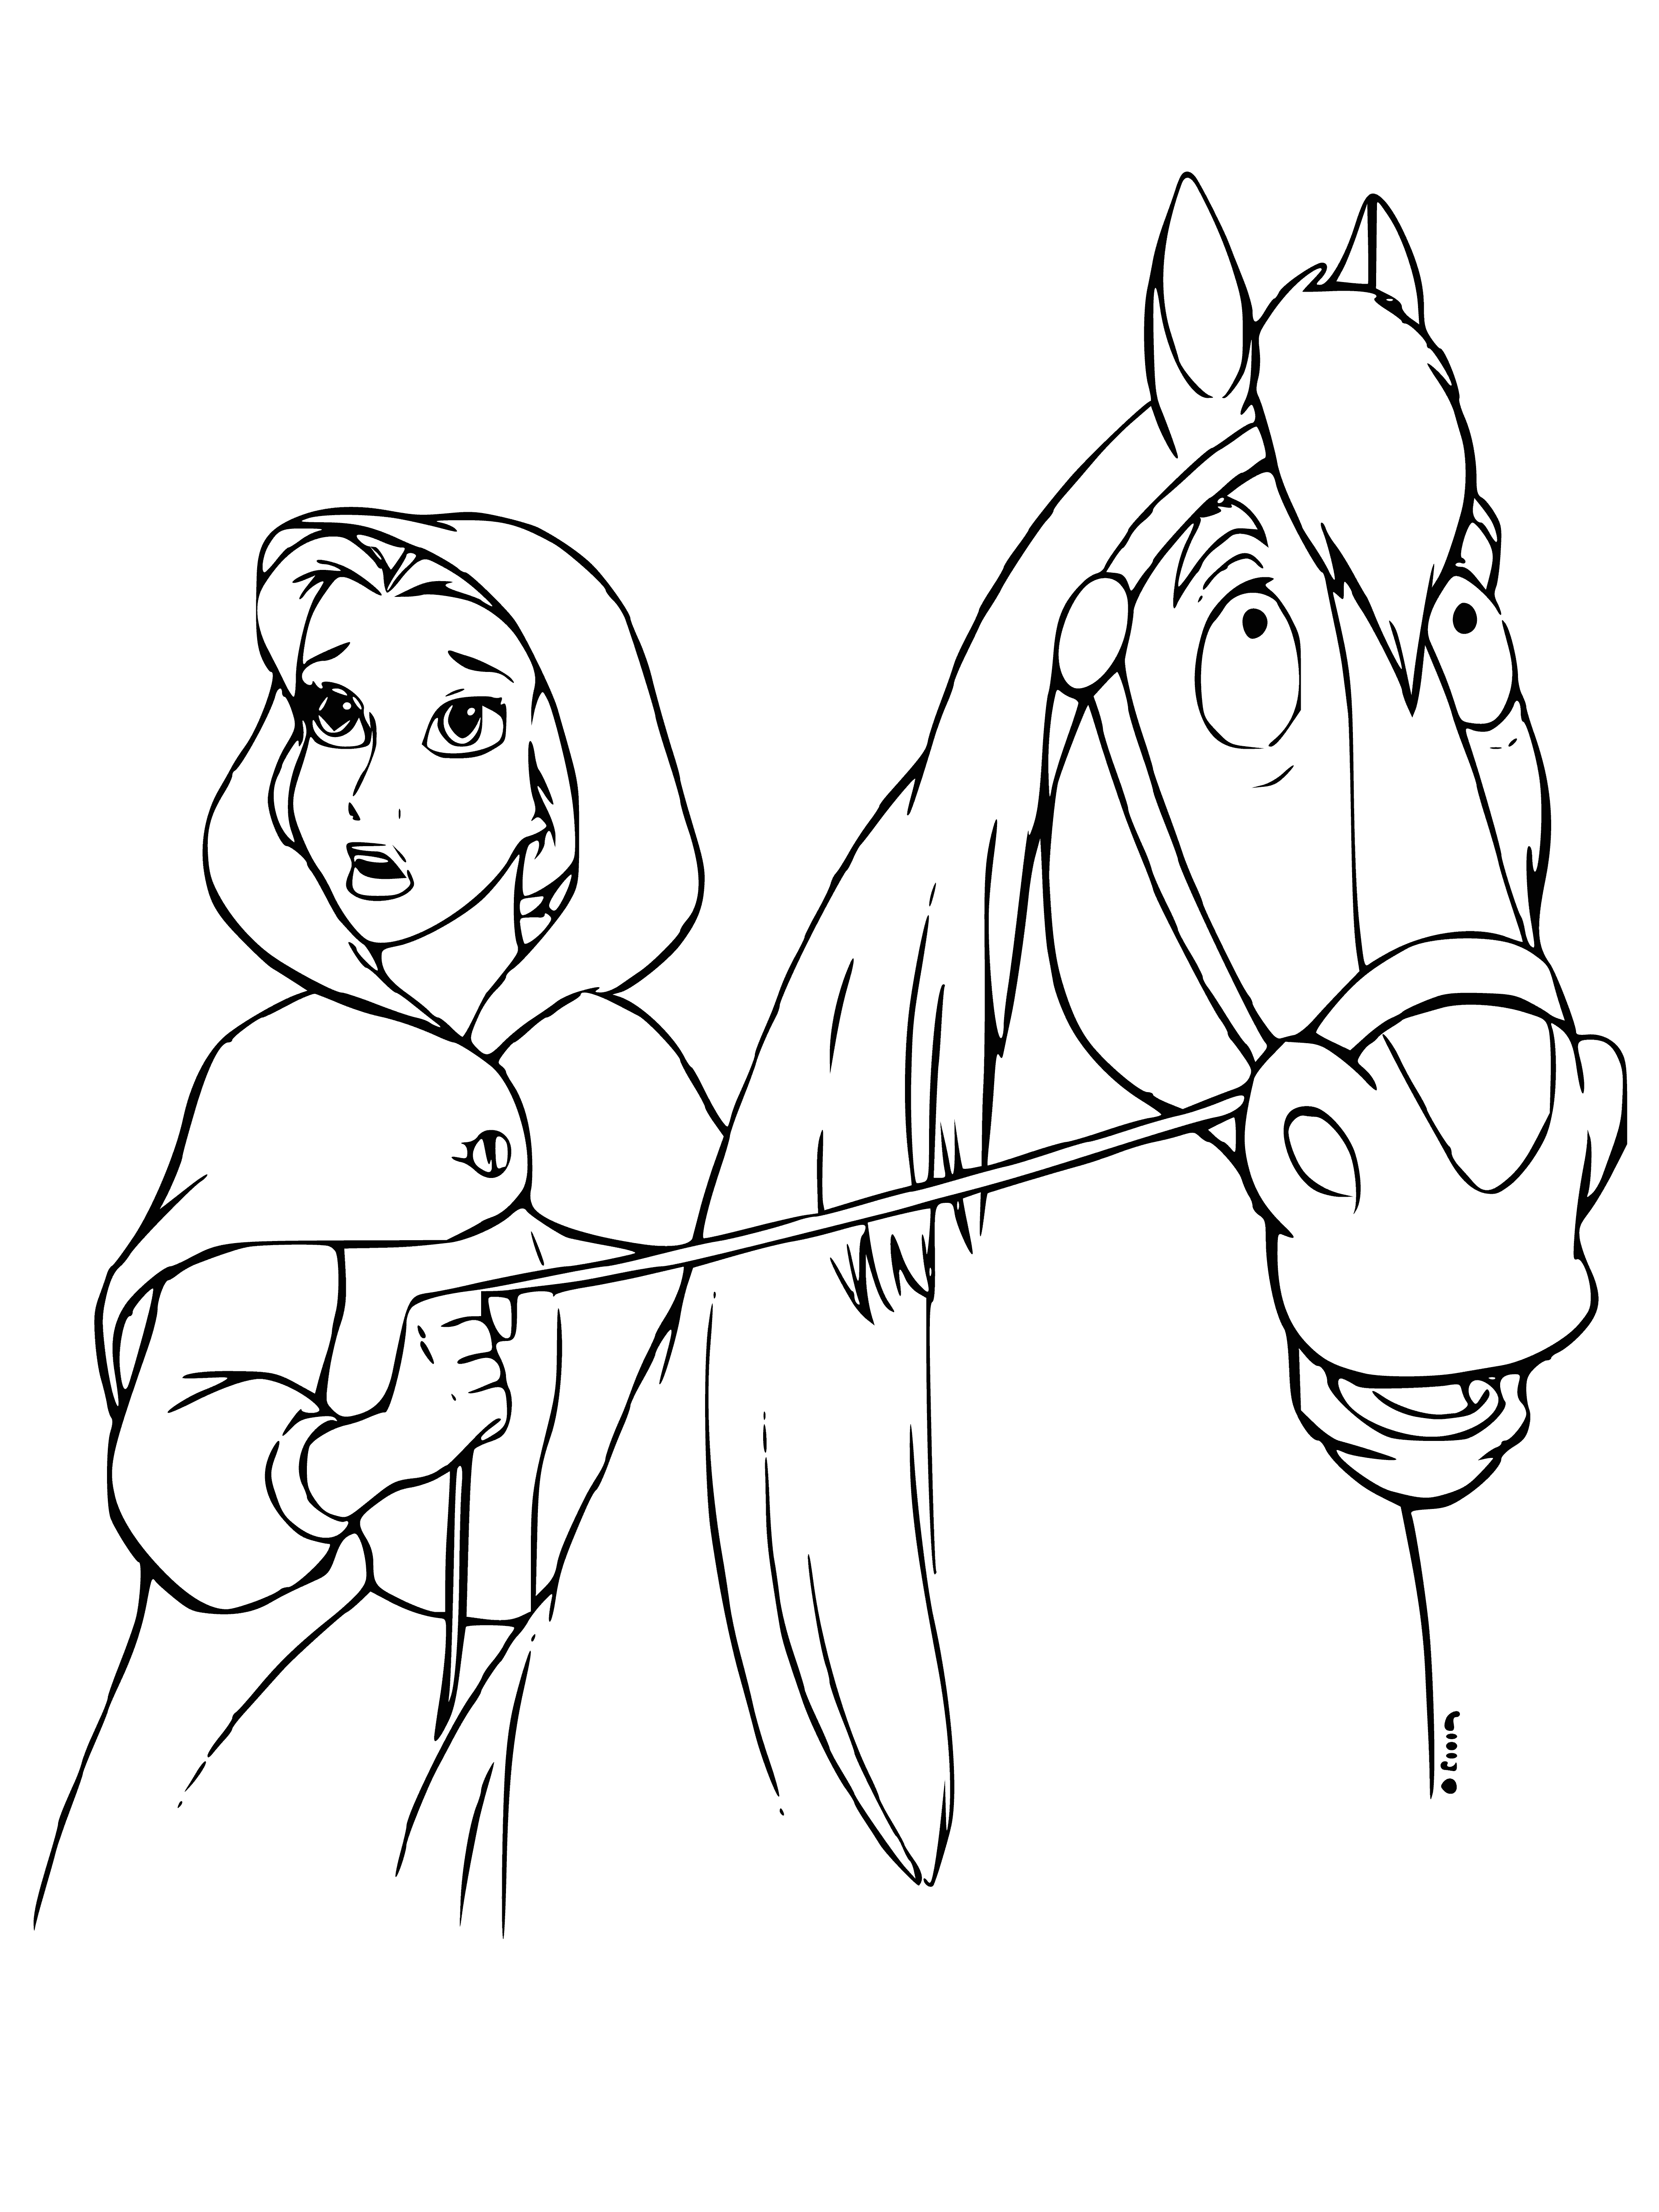 coloring page: Belle shares a tender moment with the Beast's horse, looking content despite her captivity.